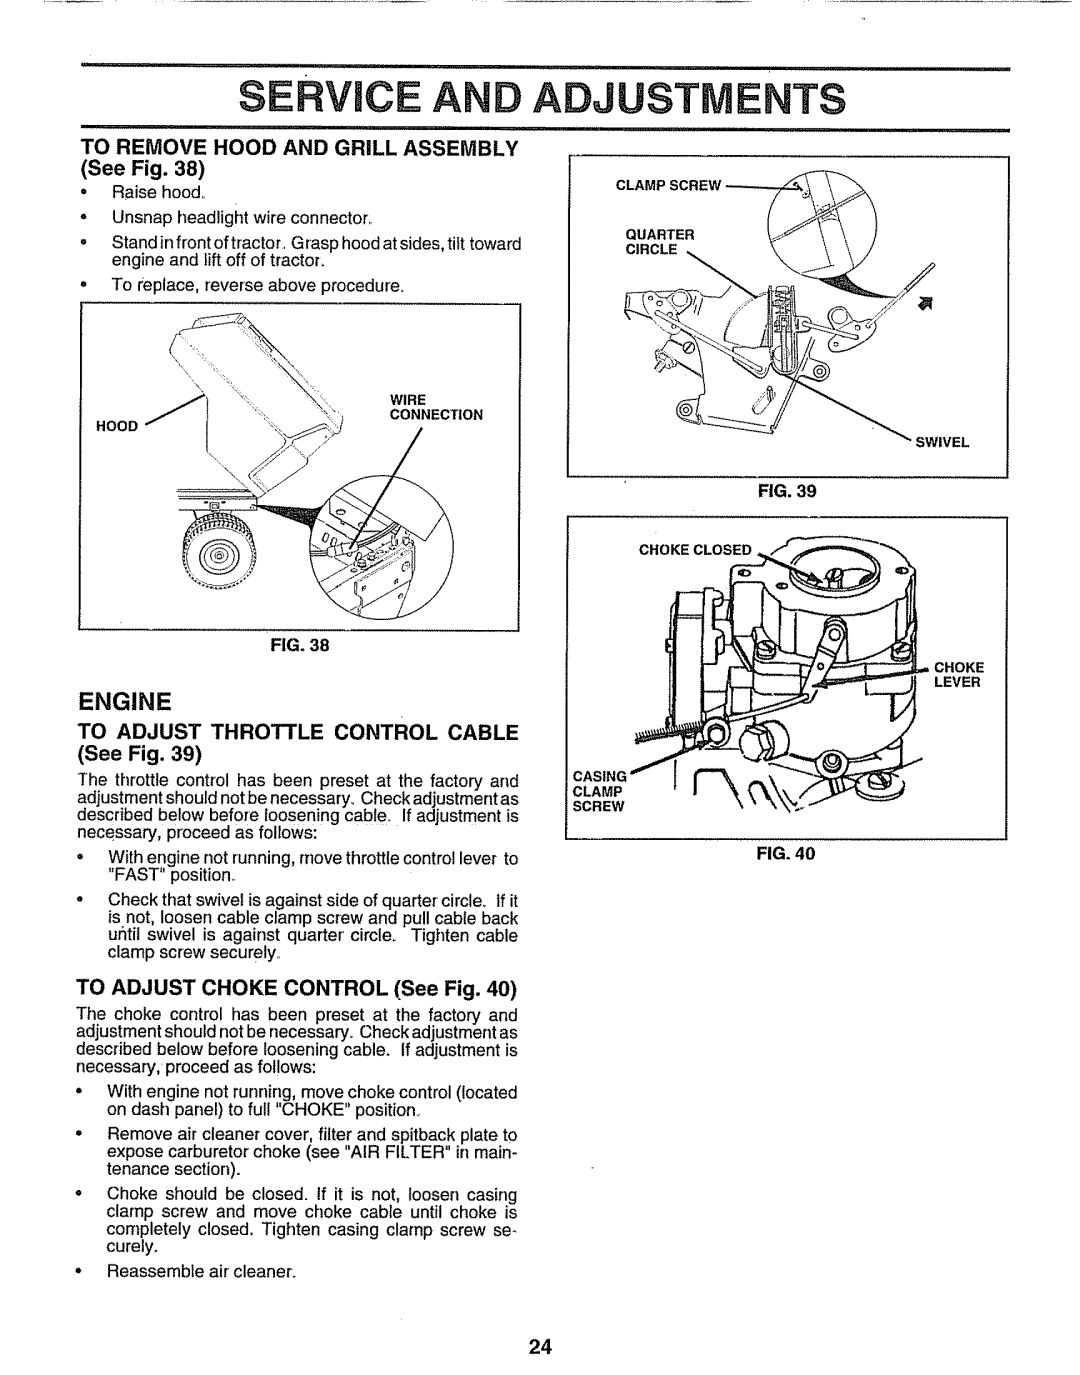 Sears 917.25597 owner manual Adjustments, Engine, To Remove Hood And Grill Assembly, TO ADJUST CHOKE CONTROL See Fig 